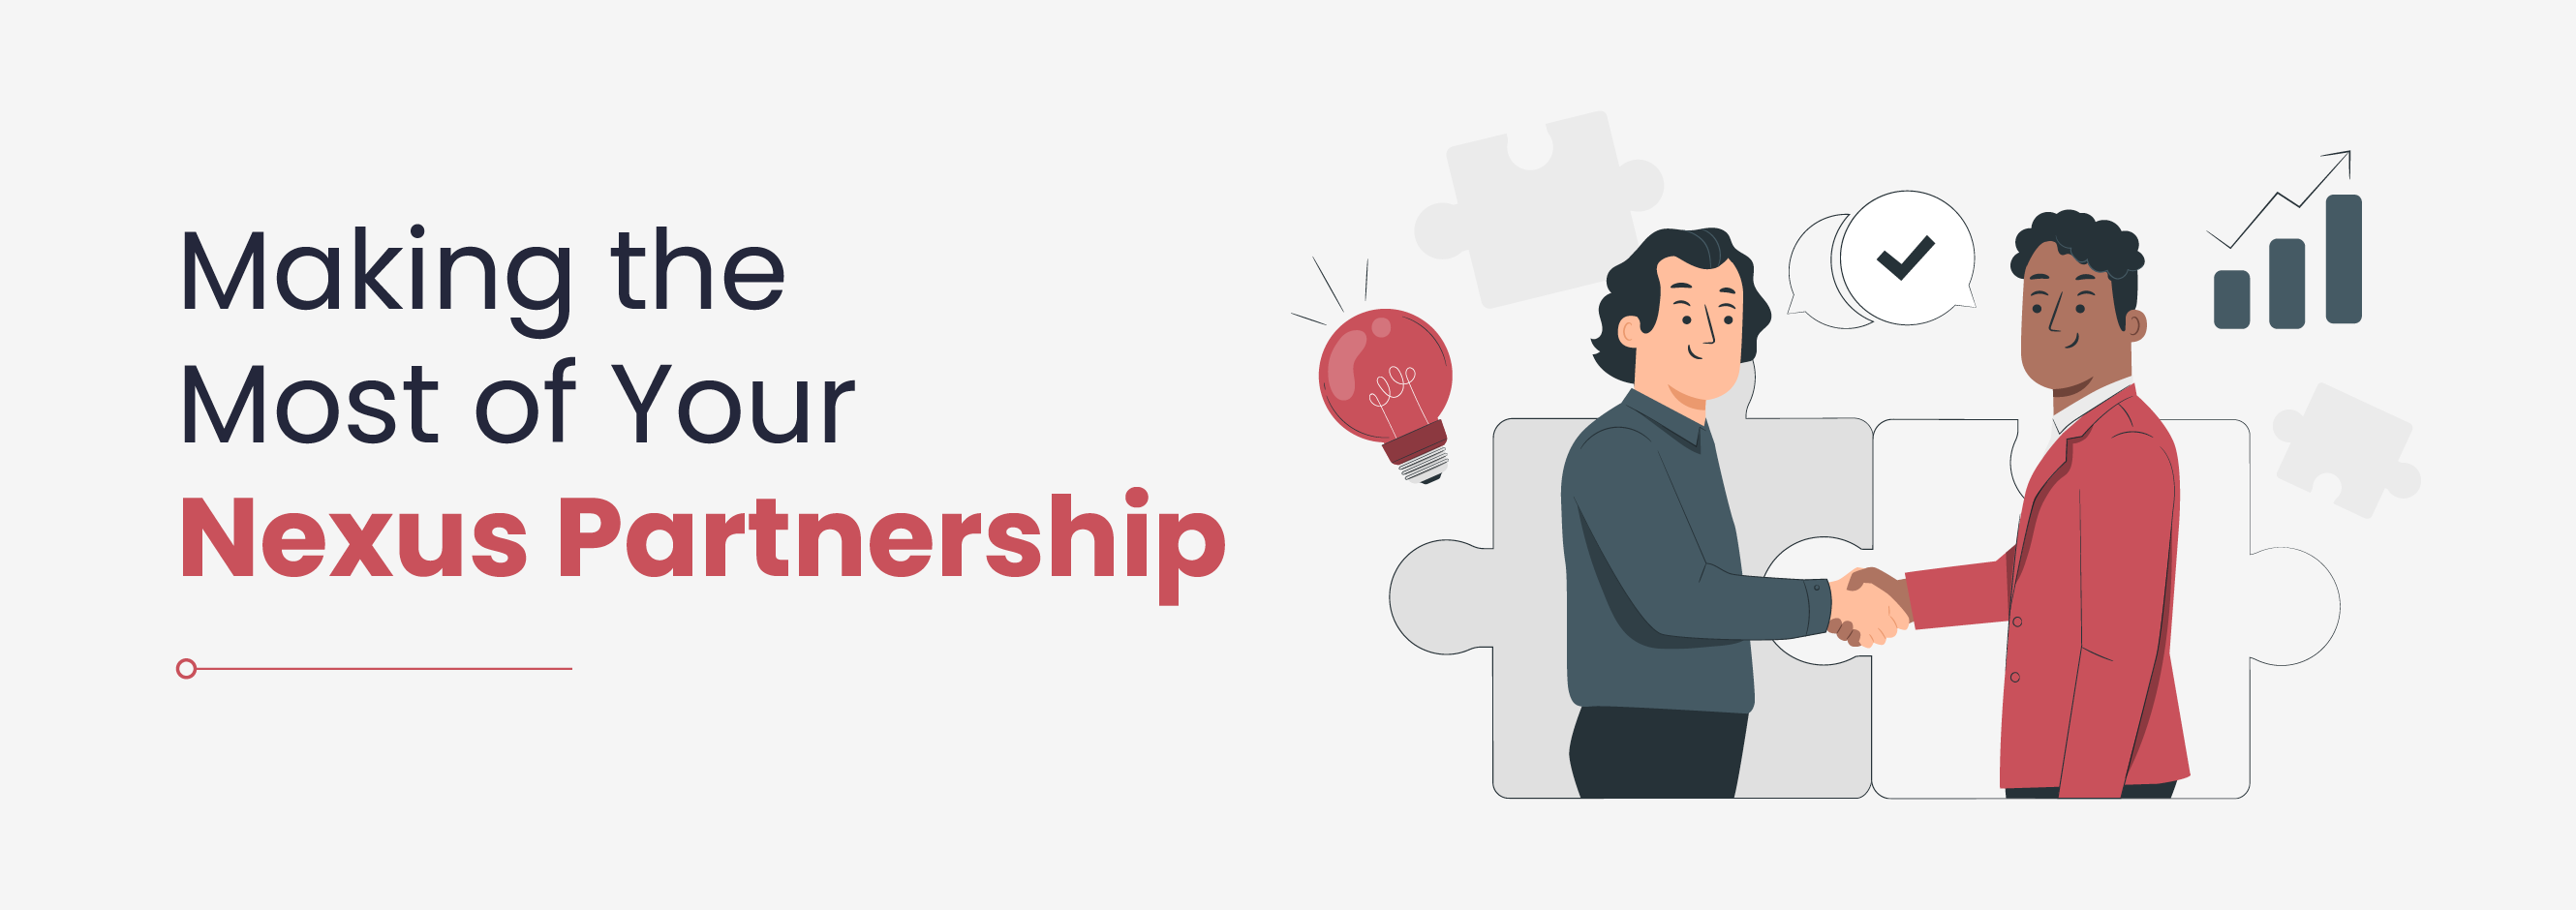 How to make the most of your partnership with Nexus Marketing